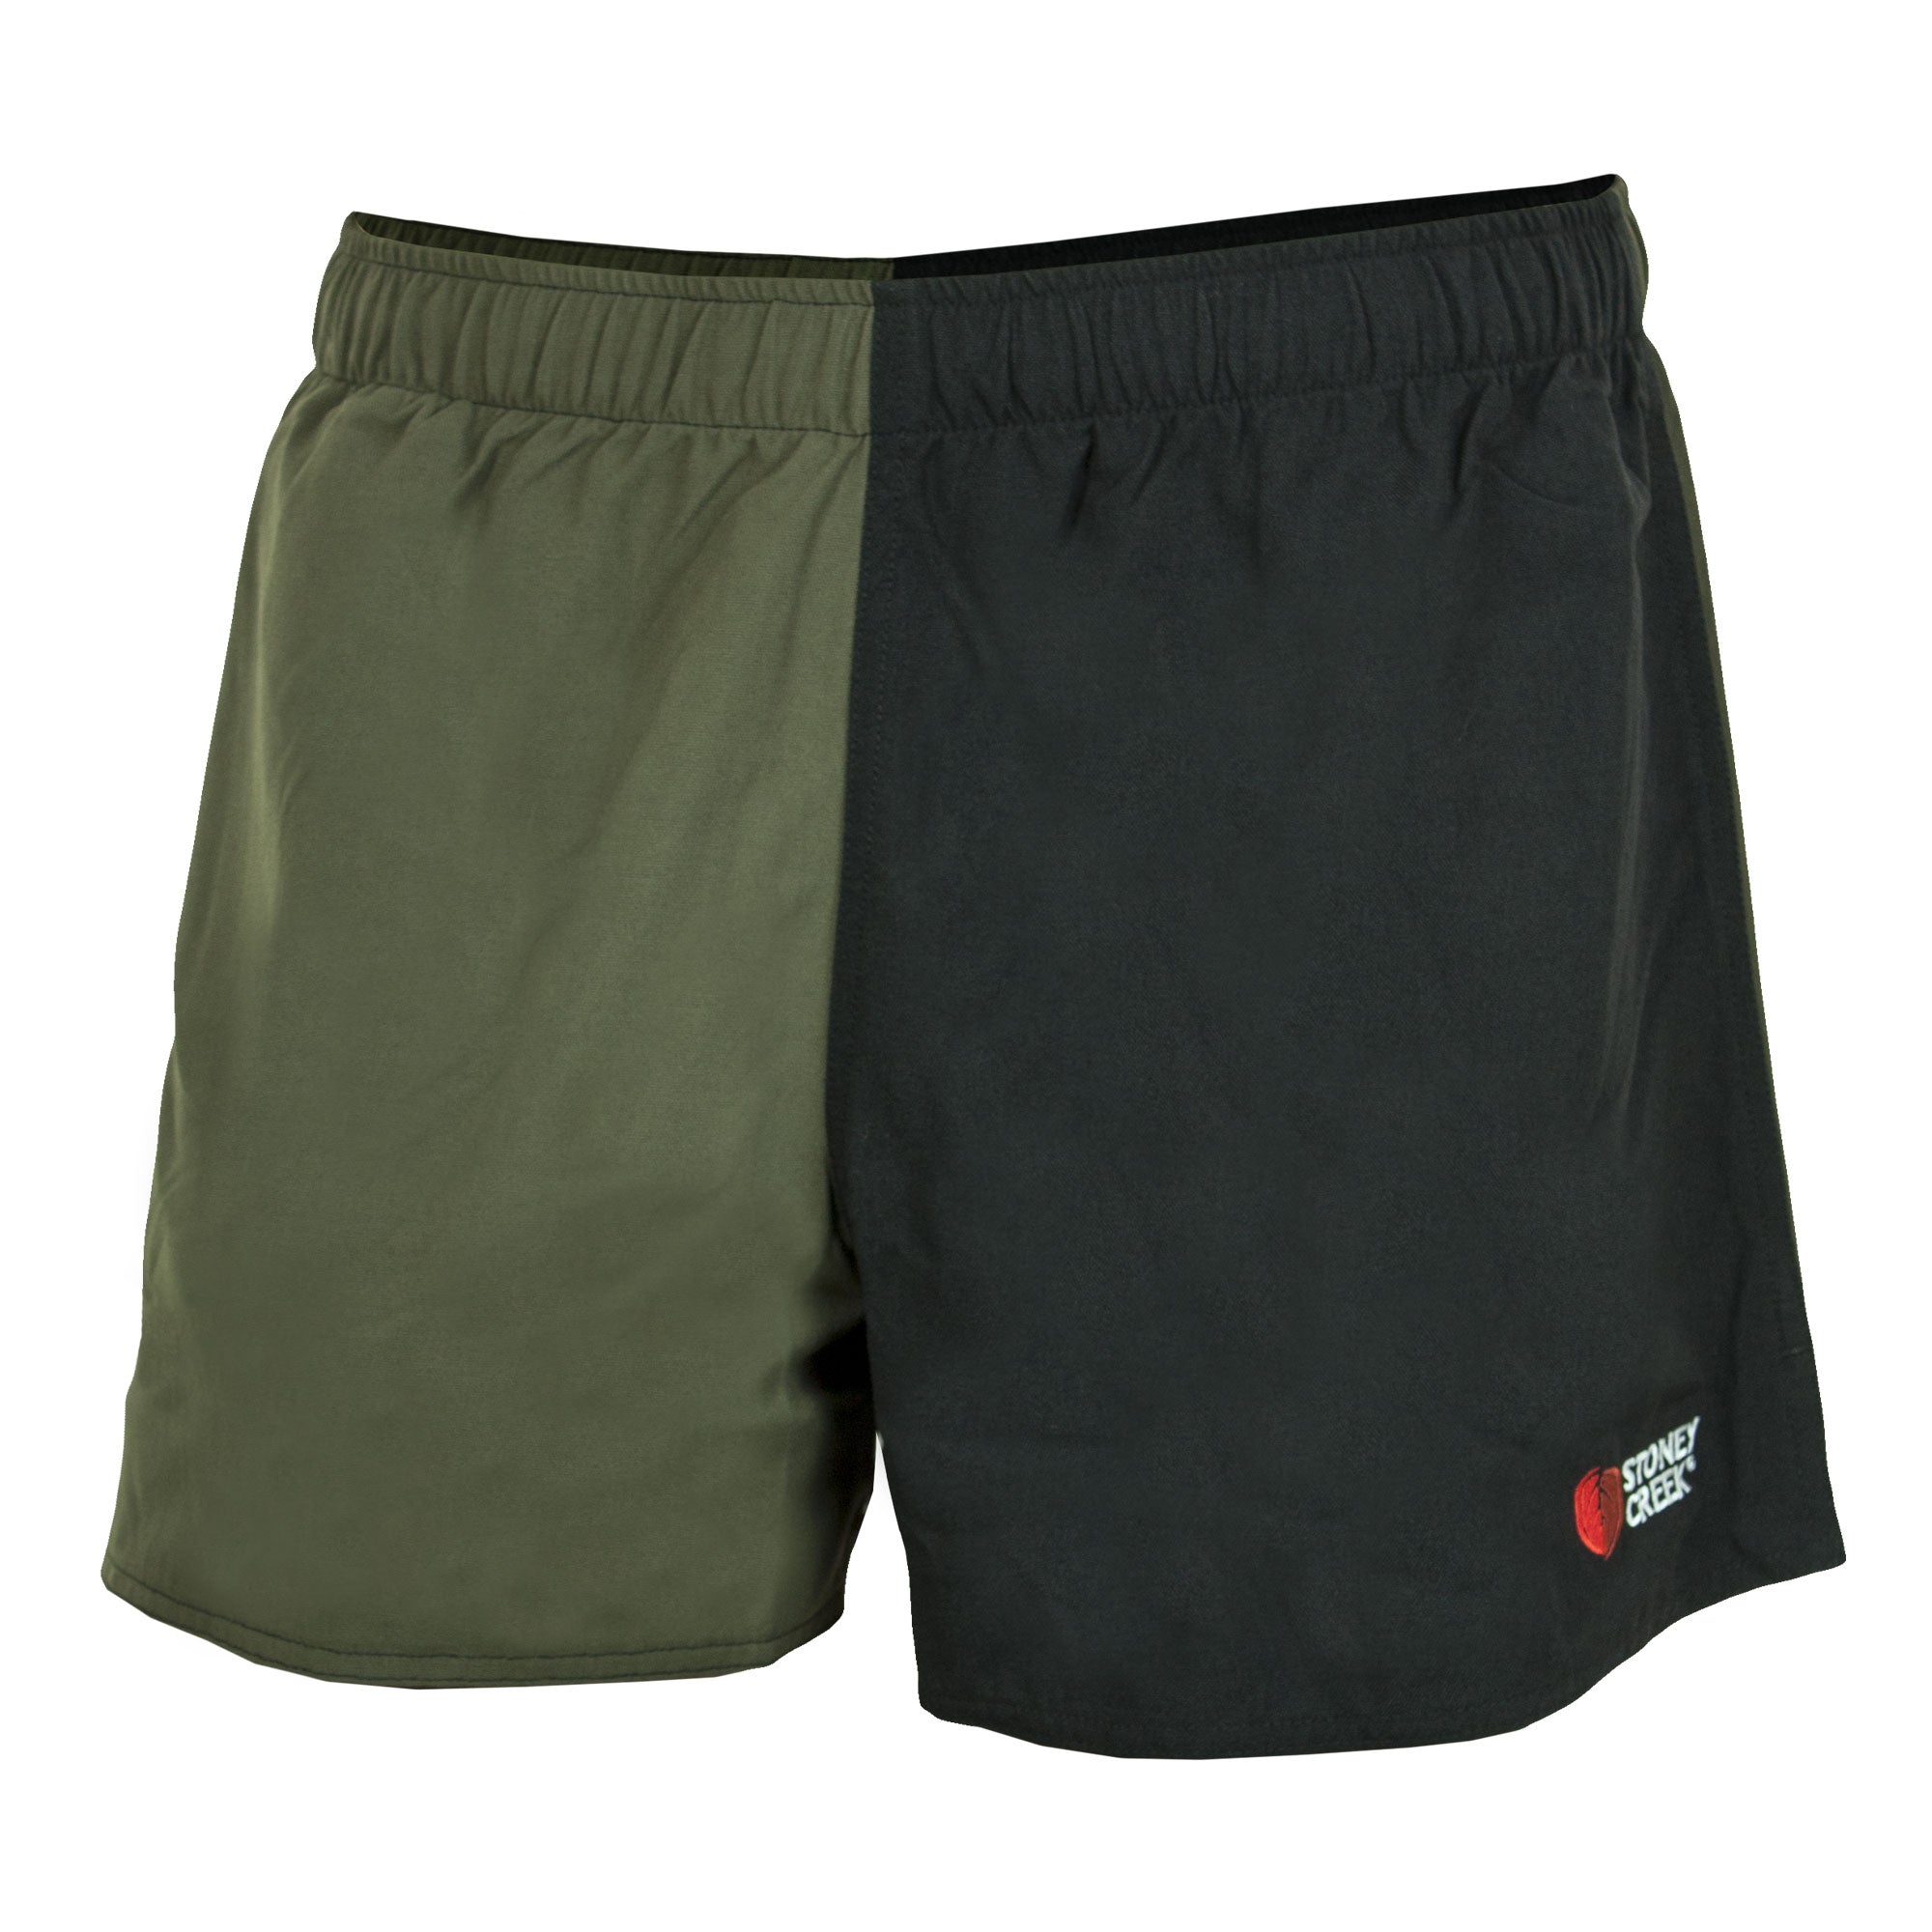 Stoney Creek Jester Shorts - Bayleaf/Black - S / BAYLEAF/BLACK - Mansfield Hunting & Fishing - Products to prepare for Corona Virus